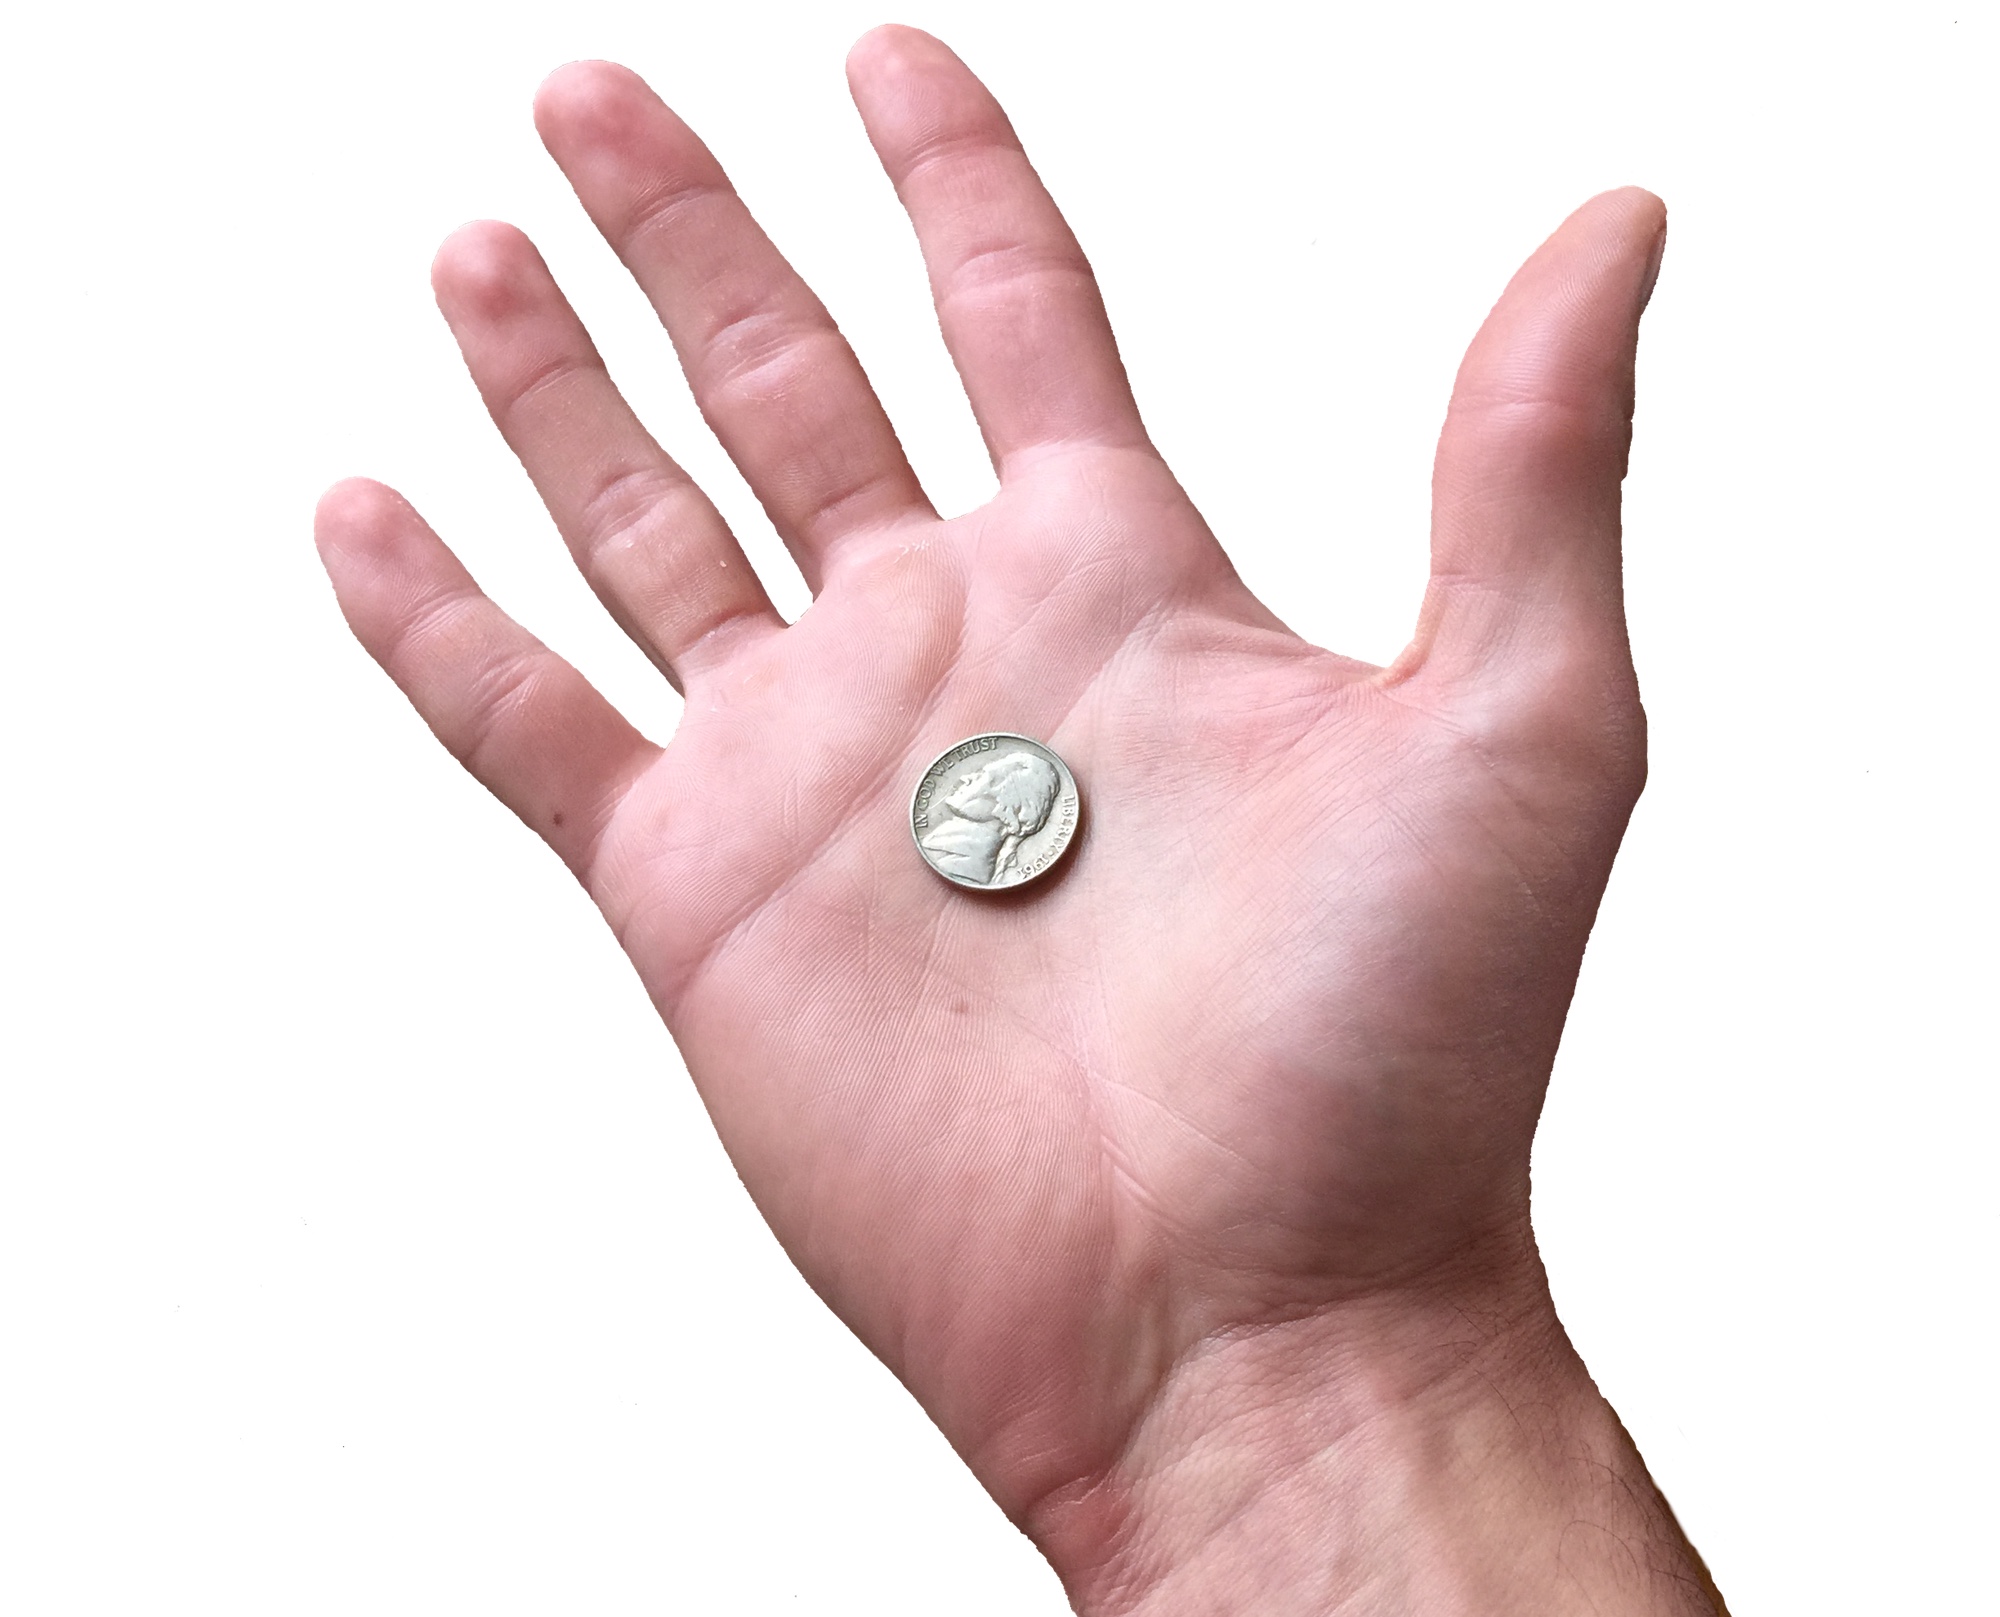 A nickel in the palm of a hand